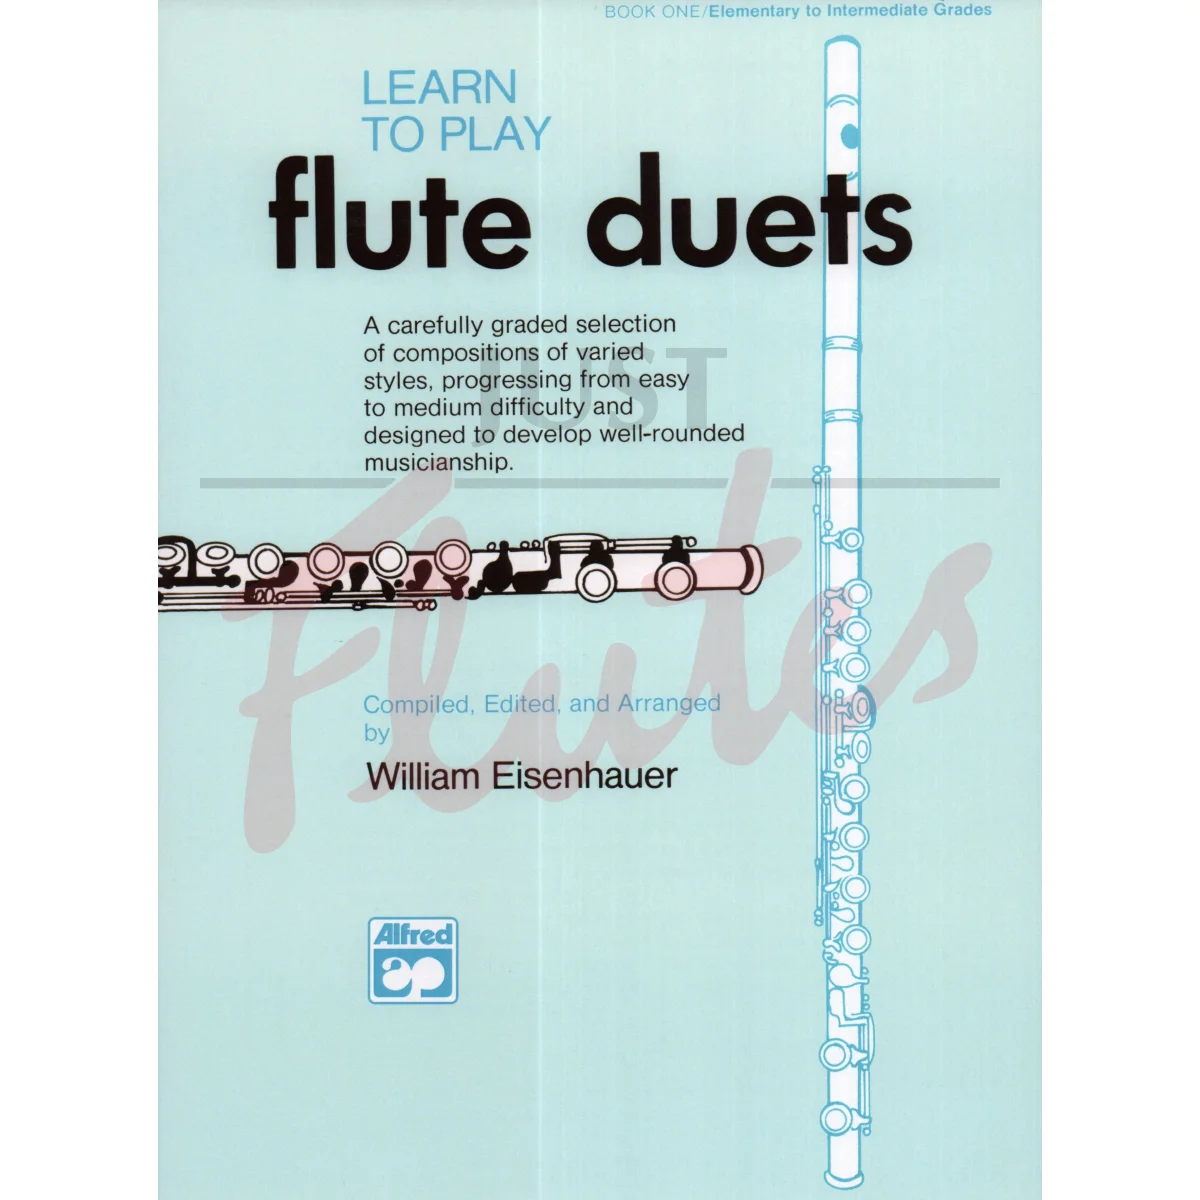 Learn to Play Flute Duets, Book One